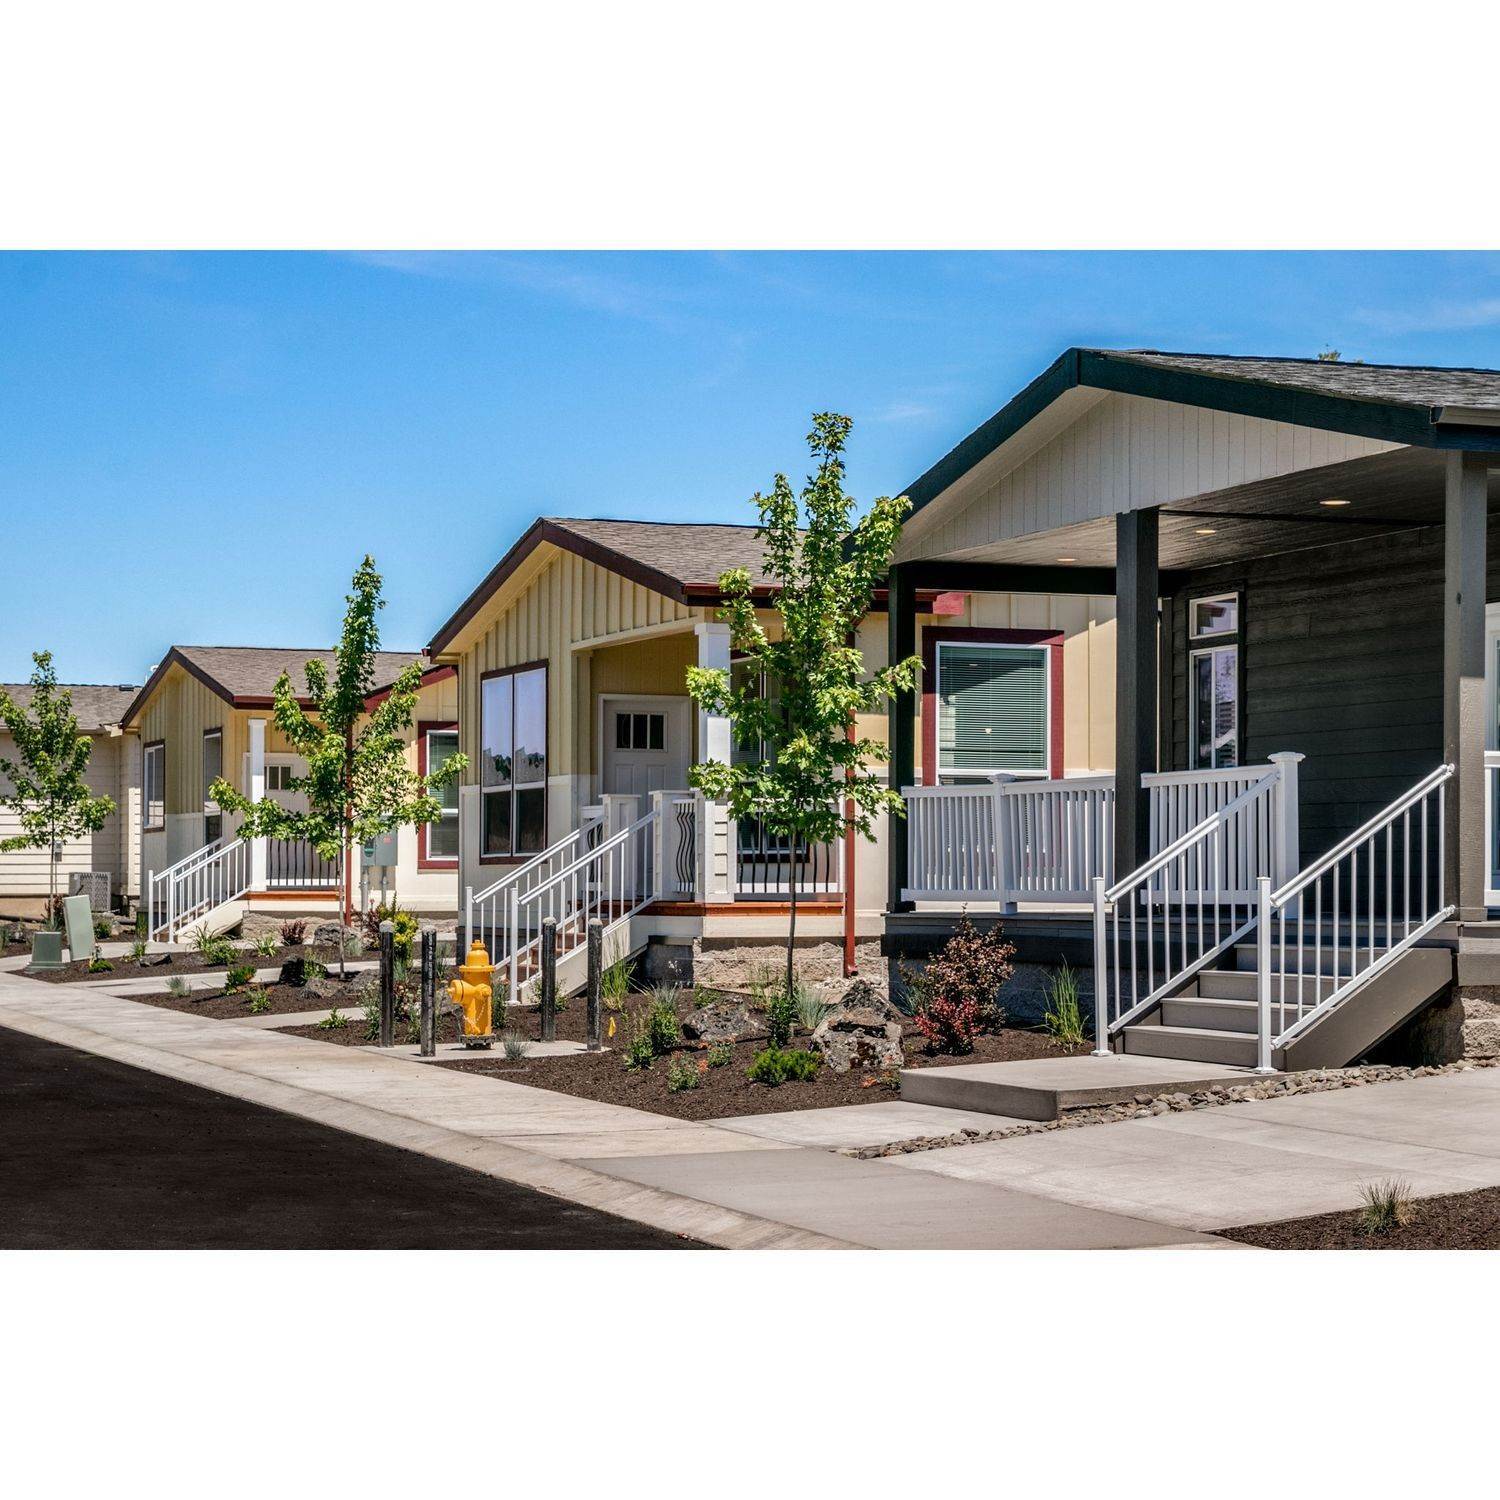 28. building at 63700 Cascade Village Drive, Bend, OR 97701